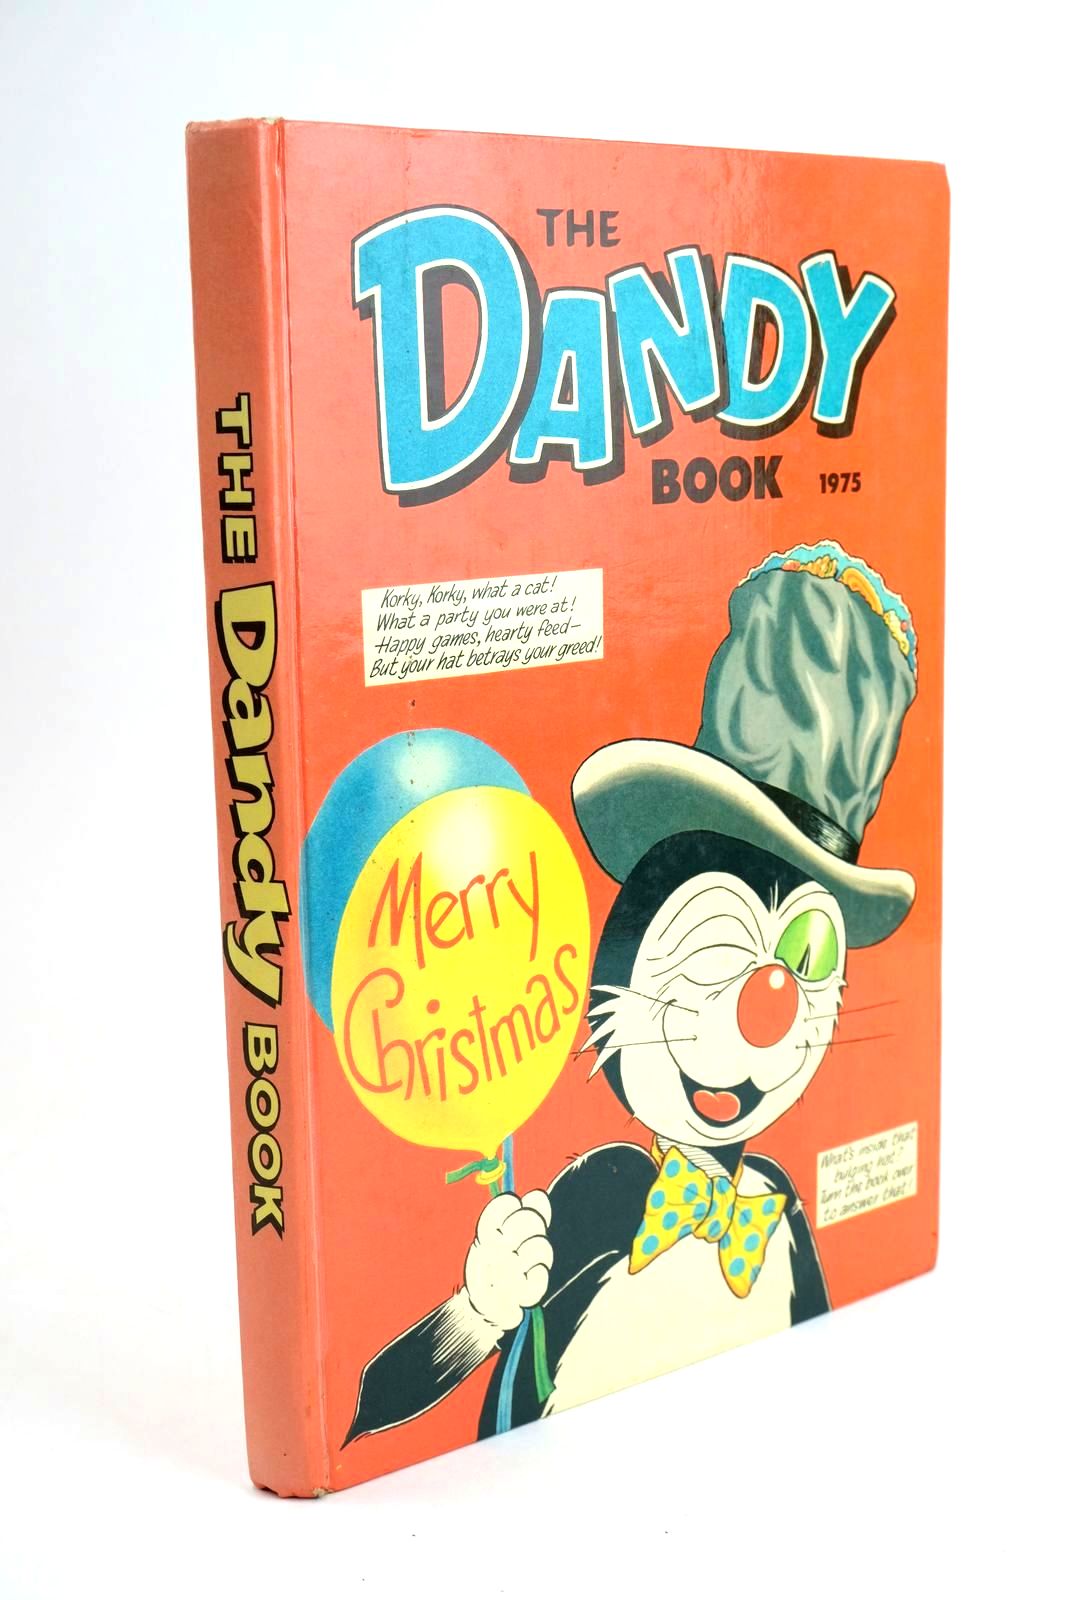 Photo of THE DANDY BOOK 1975 published by D.C. Thomson &amp; Co Ltd. (STOCK CODE: 1323414)  for sale by Stella & Rose's Books